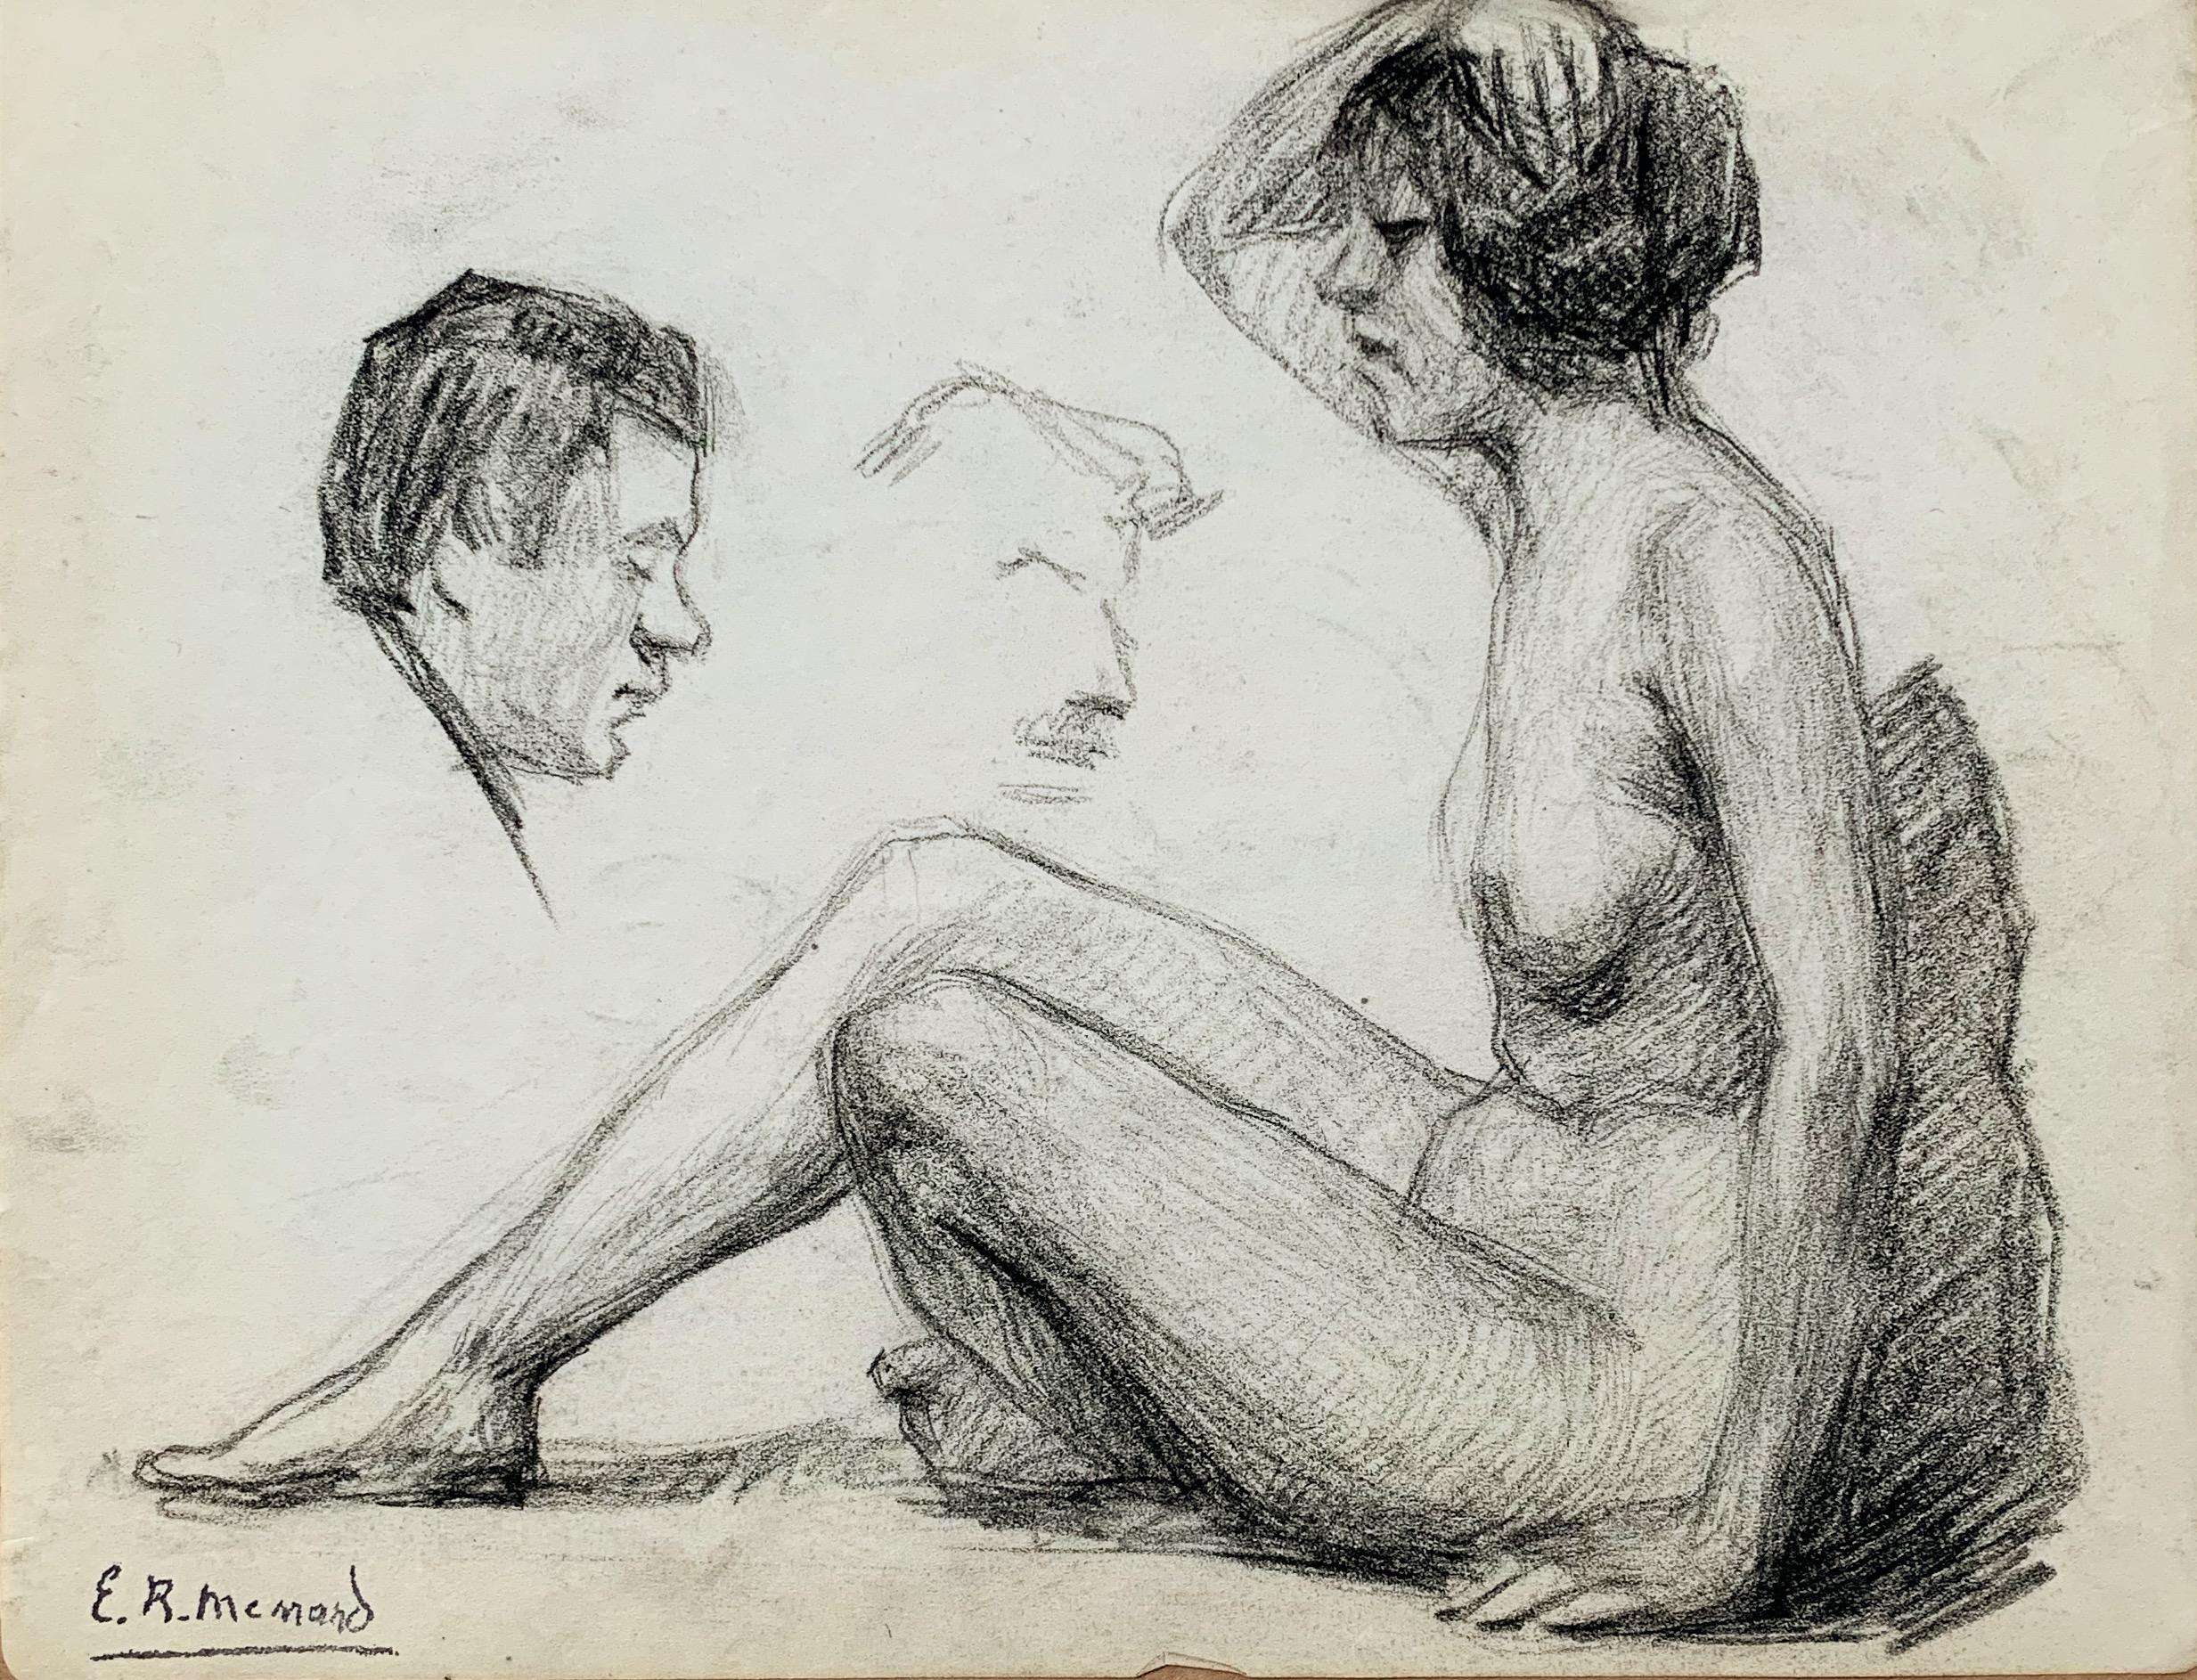 Emile Rene MENARD (1862-1930) 
Study of a female nude and a male head 
Charcoal on paper
Signed with stamp lower left
21 x 26.5 cm
Good condition, tiny crease lower center
Sold without frame